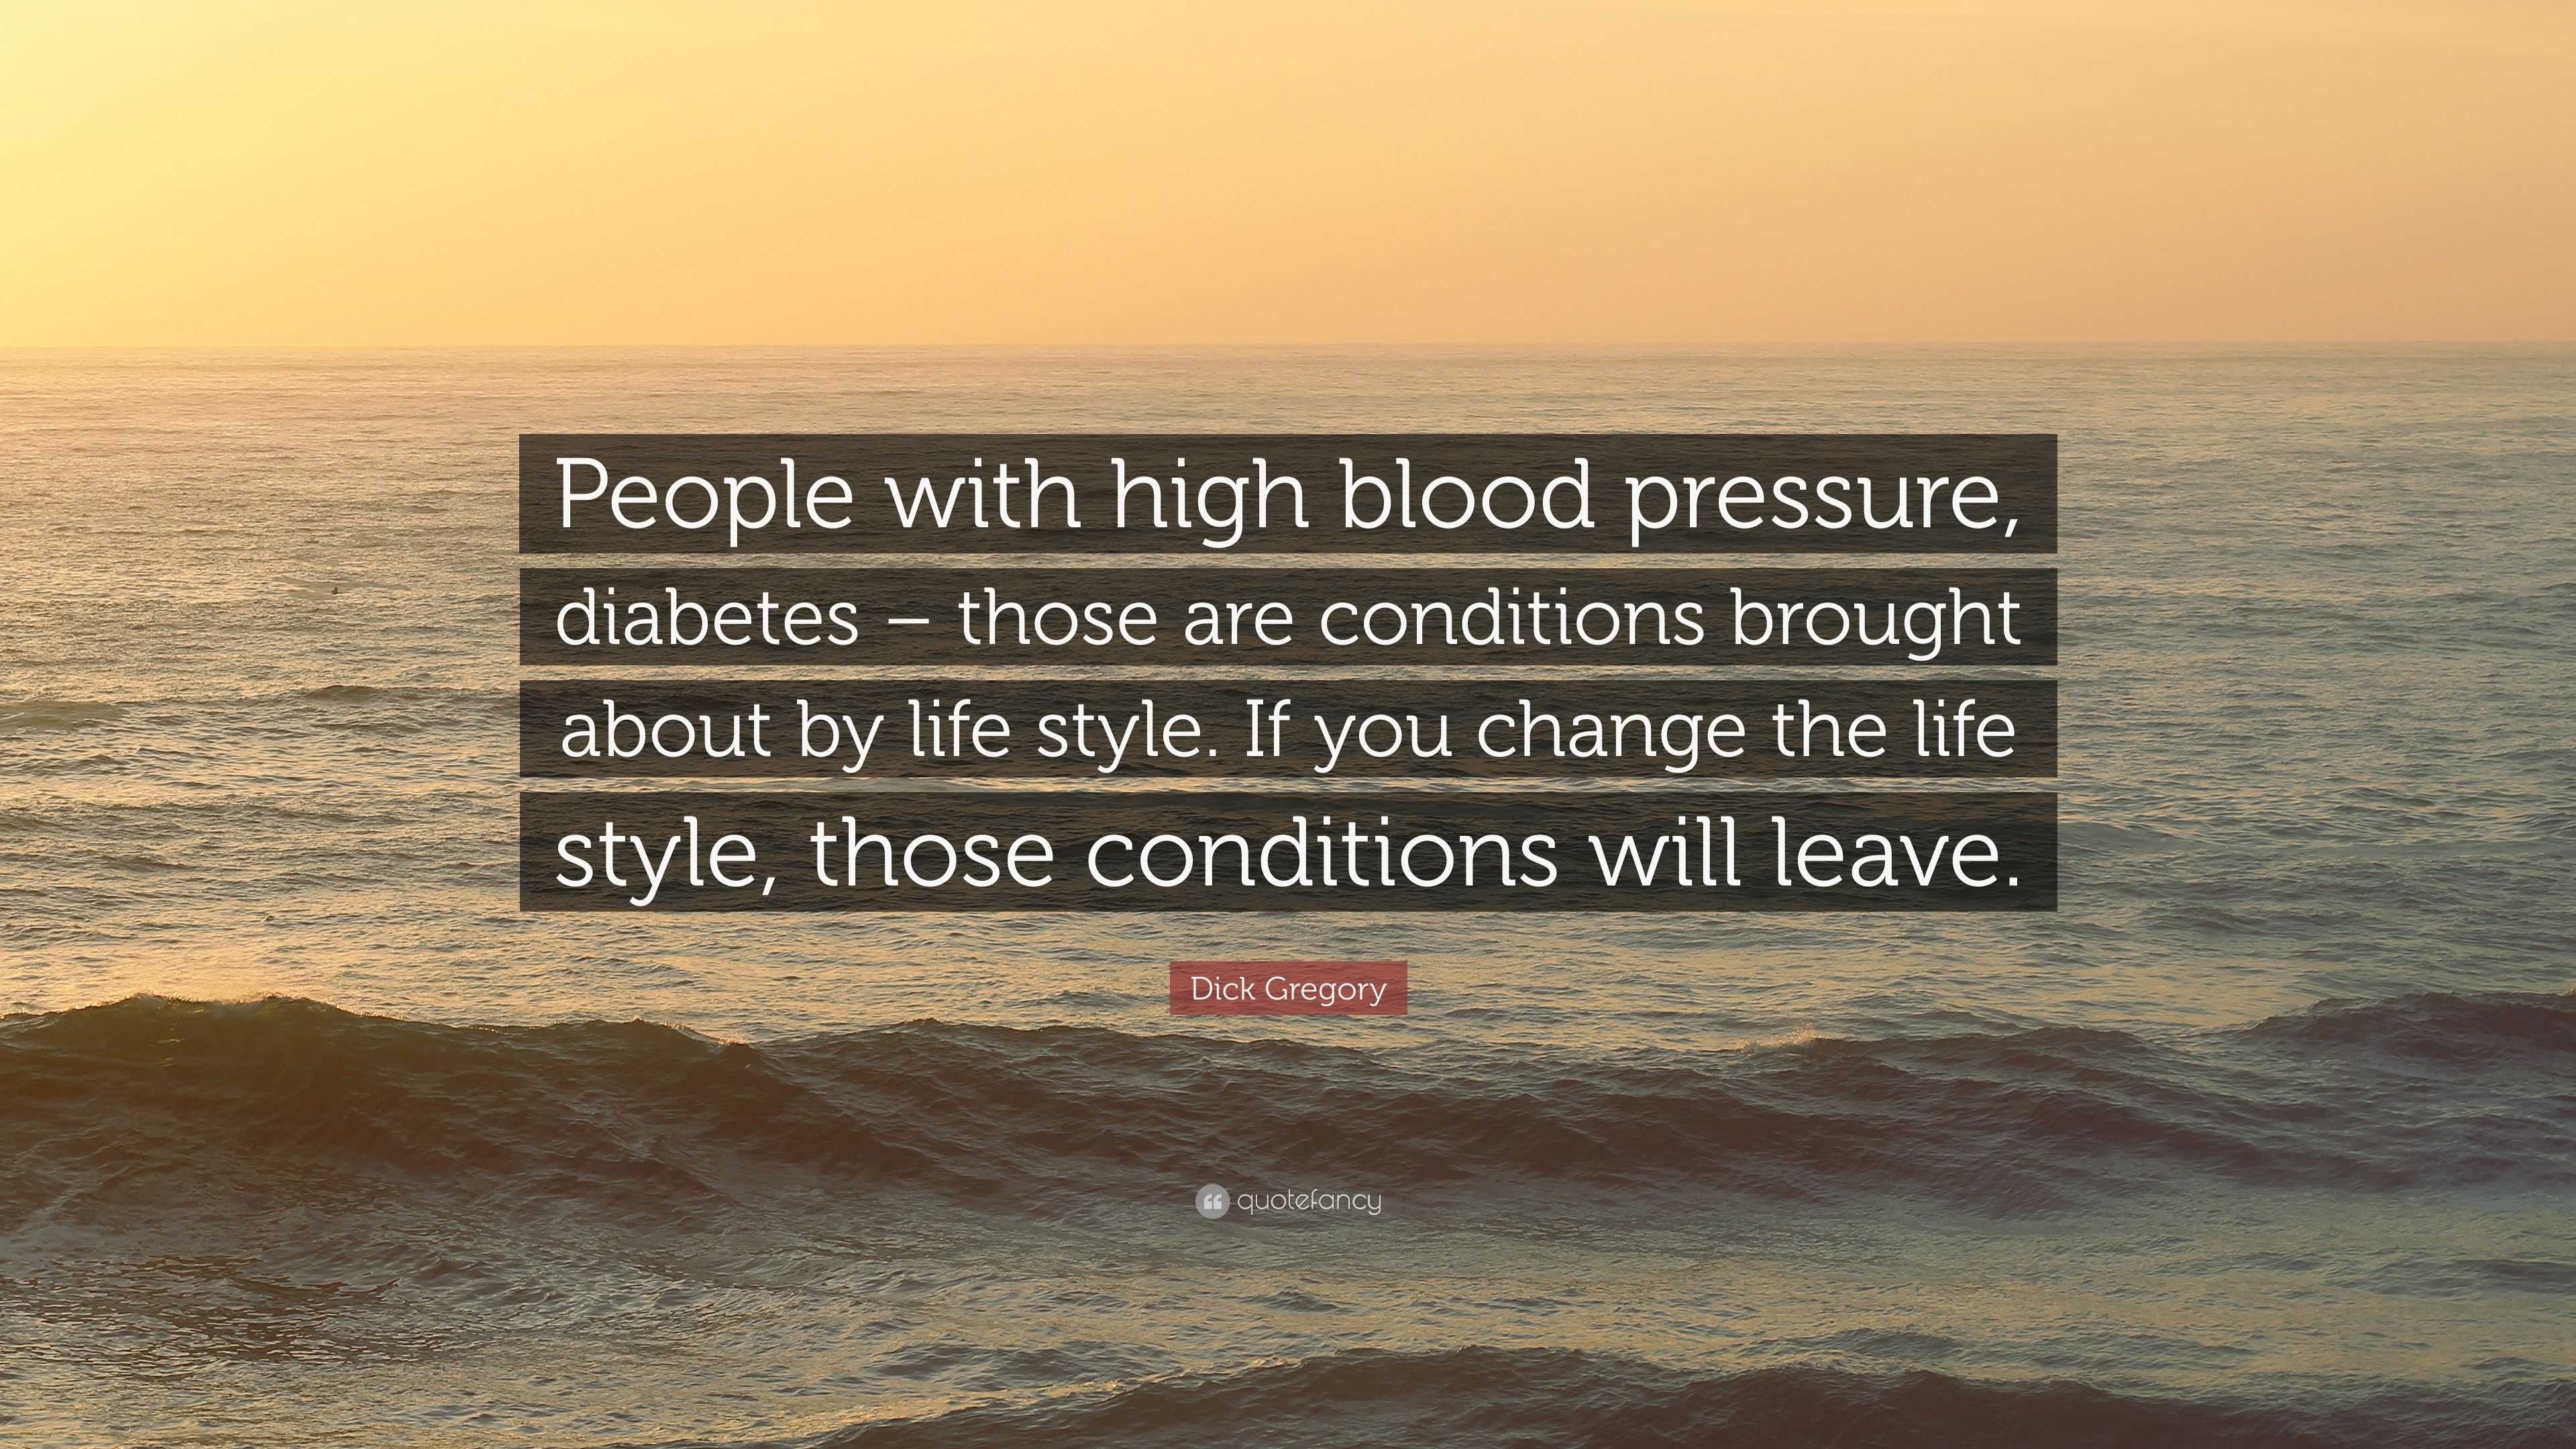 https://quotefancy.com/media/wallpaper/3840x2160/4161159-Dick-Gregory-Quote-People-with-high-blood-pressure-diabetes-those.jpg